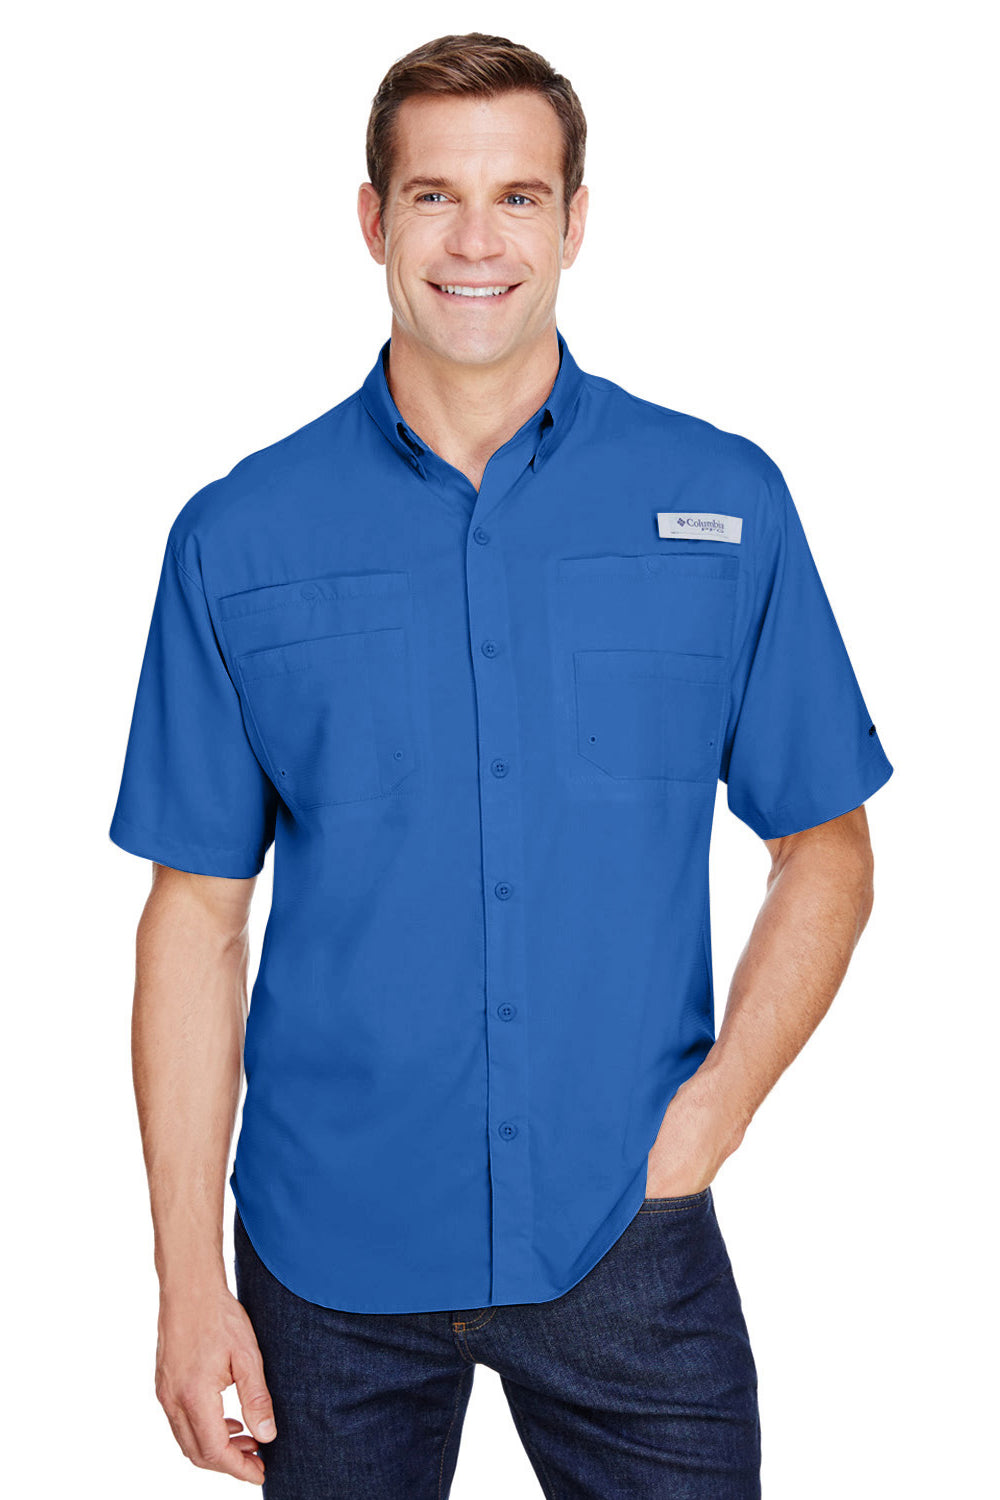 Columbia 7266 Mens Tamiami II Moisture Wicking Short Sleeve Button Down Shirt w/ Double Pockets Vivid Blue Front